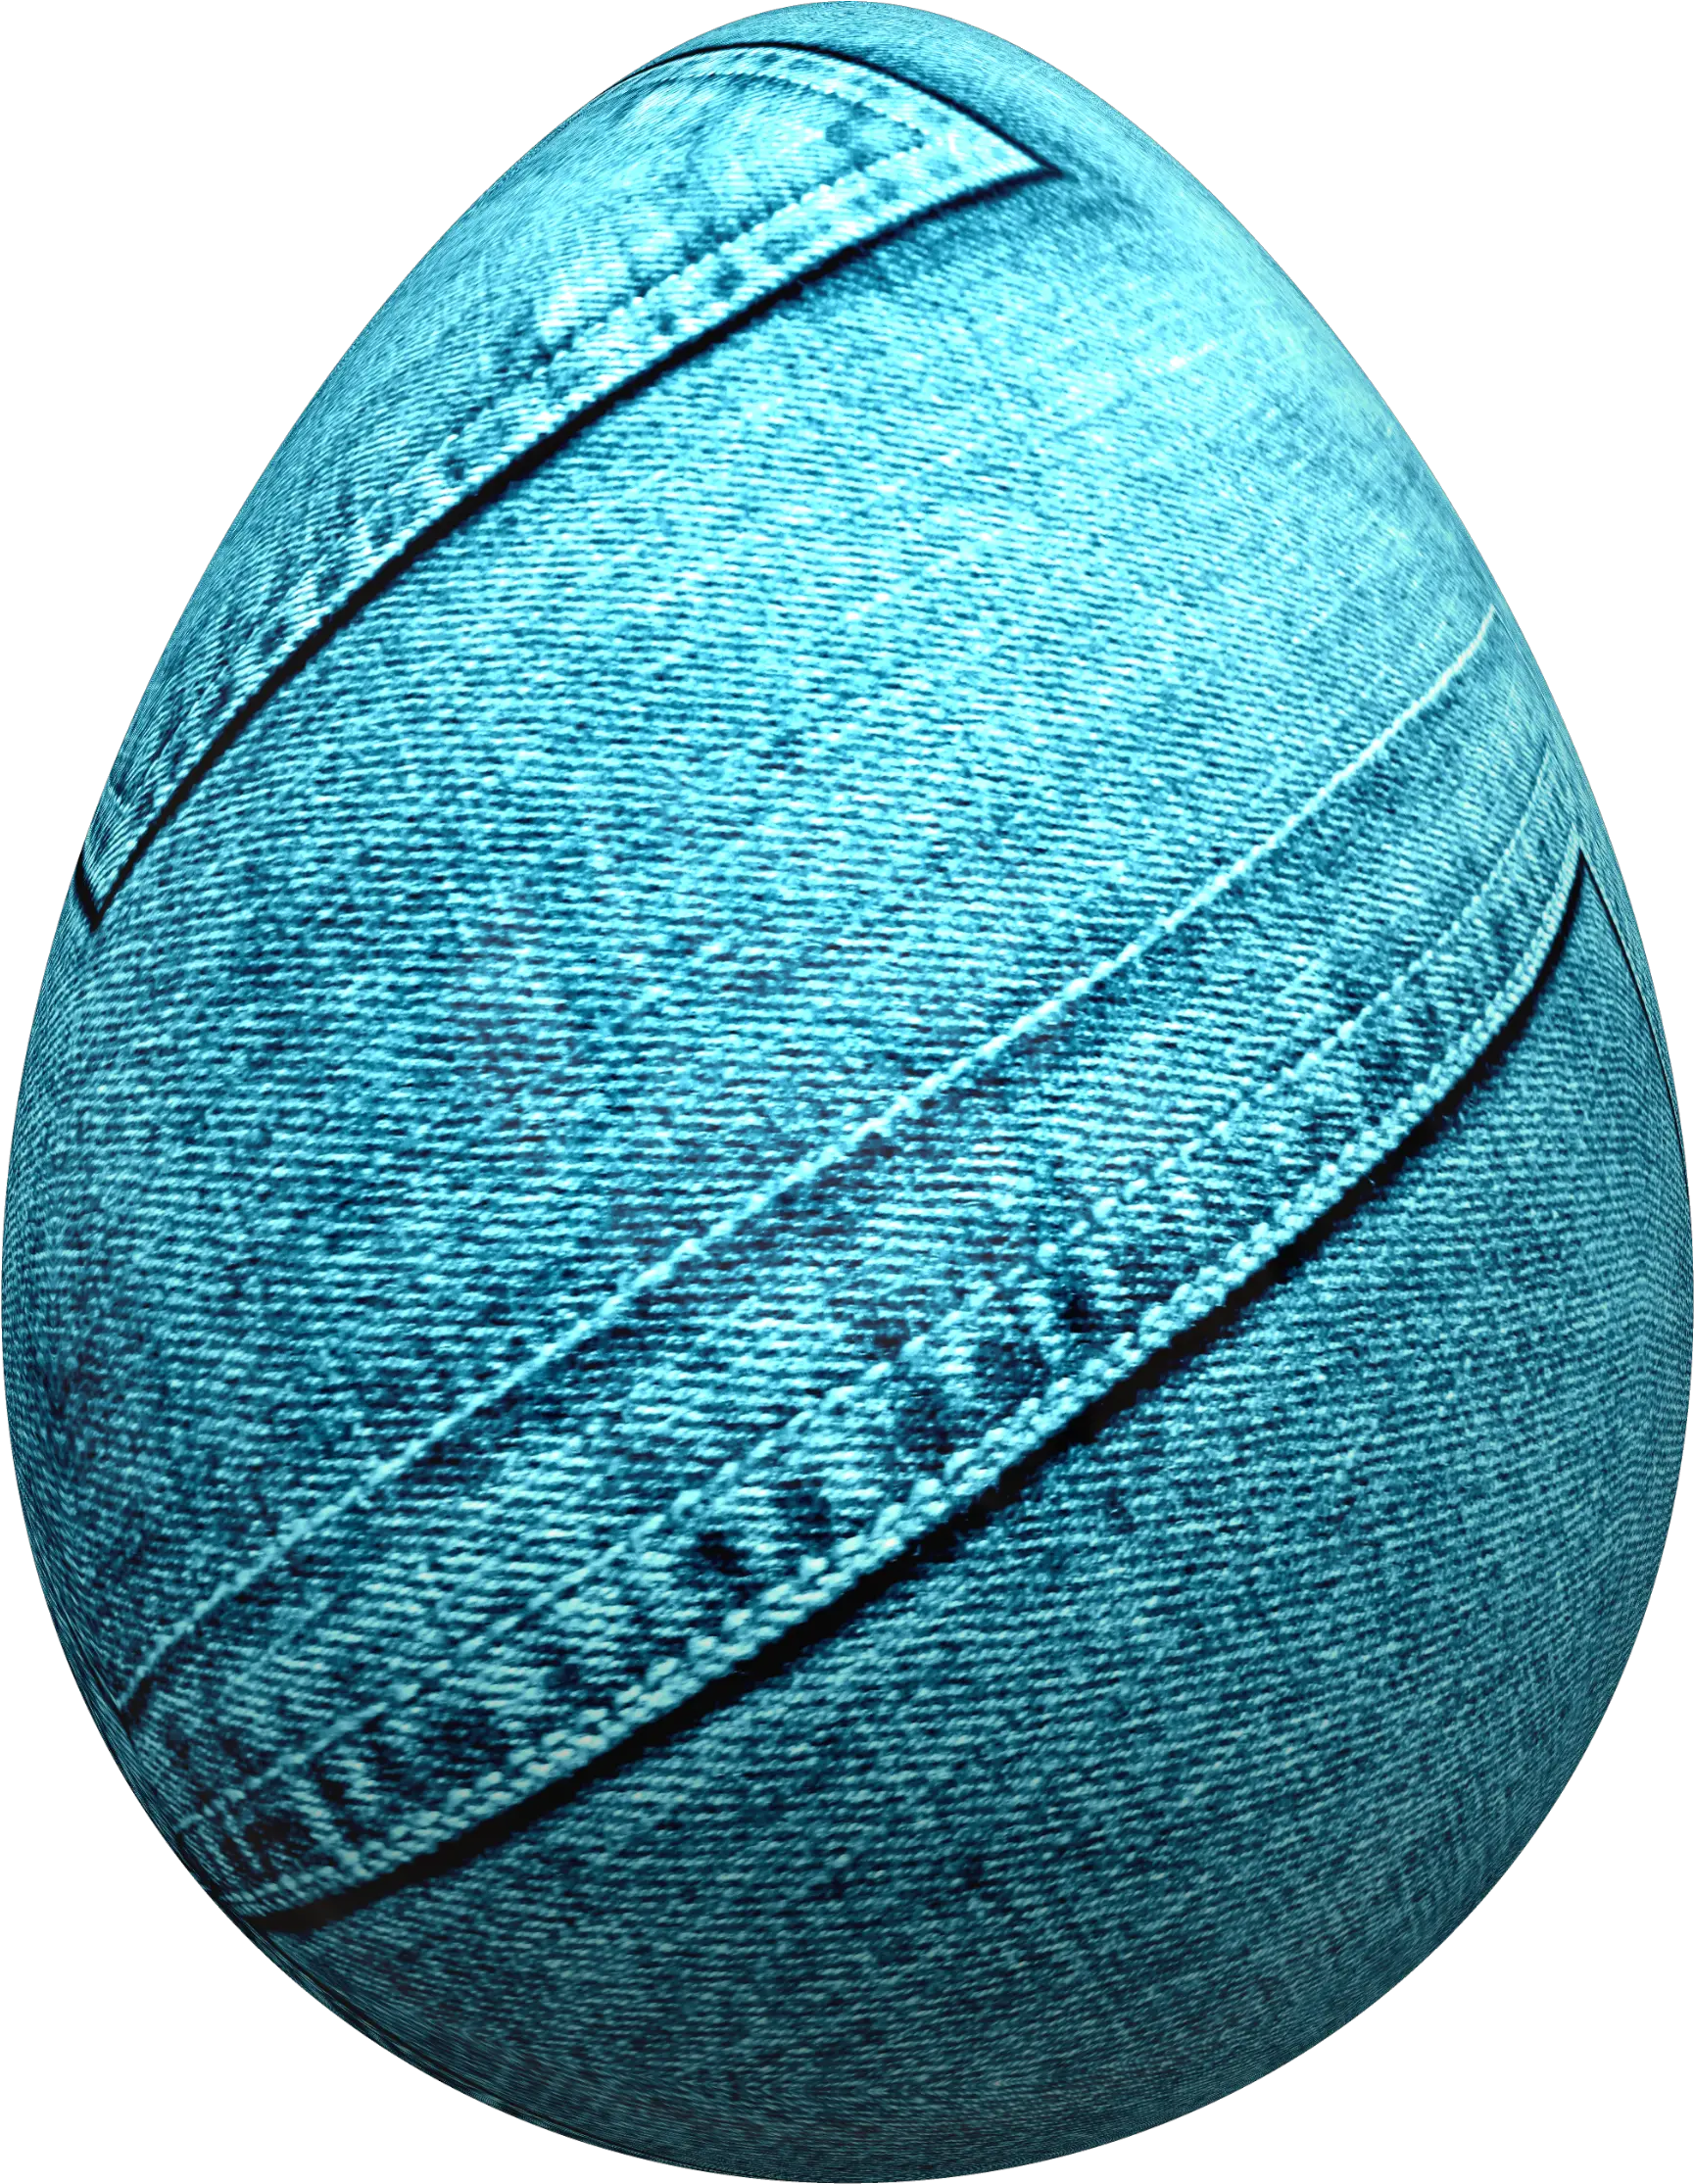 Download Egg Wrapped In Blue Jeans Png Image For Free Jeans Egg Jeans Png